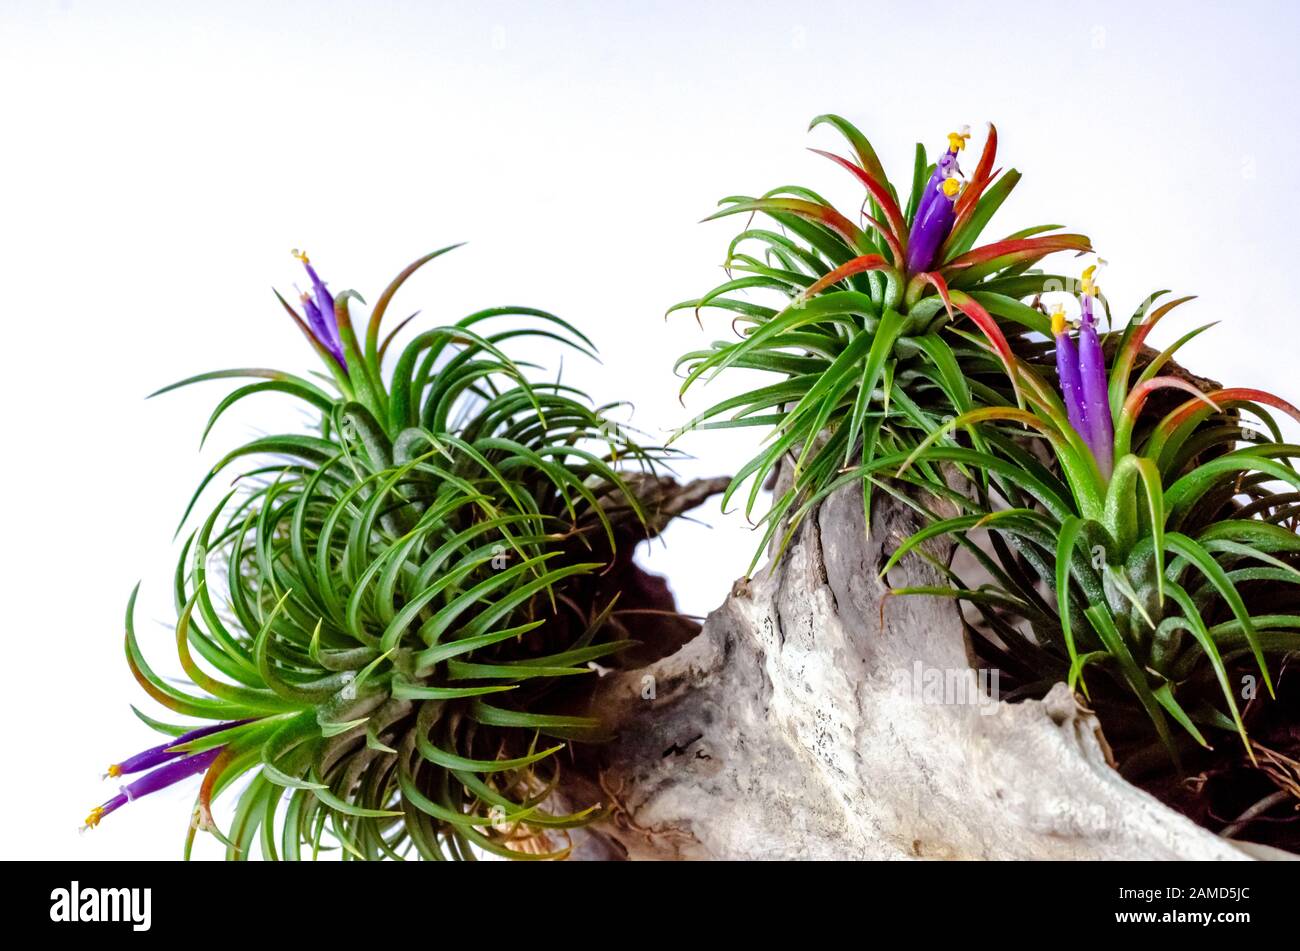 Tillandsia or Air plant which is grows without soil blooming with colorfulf flowers attached at the wood on white background. Stock Photo